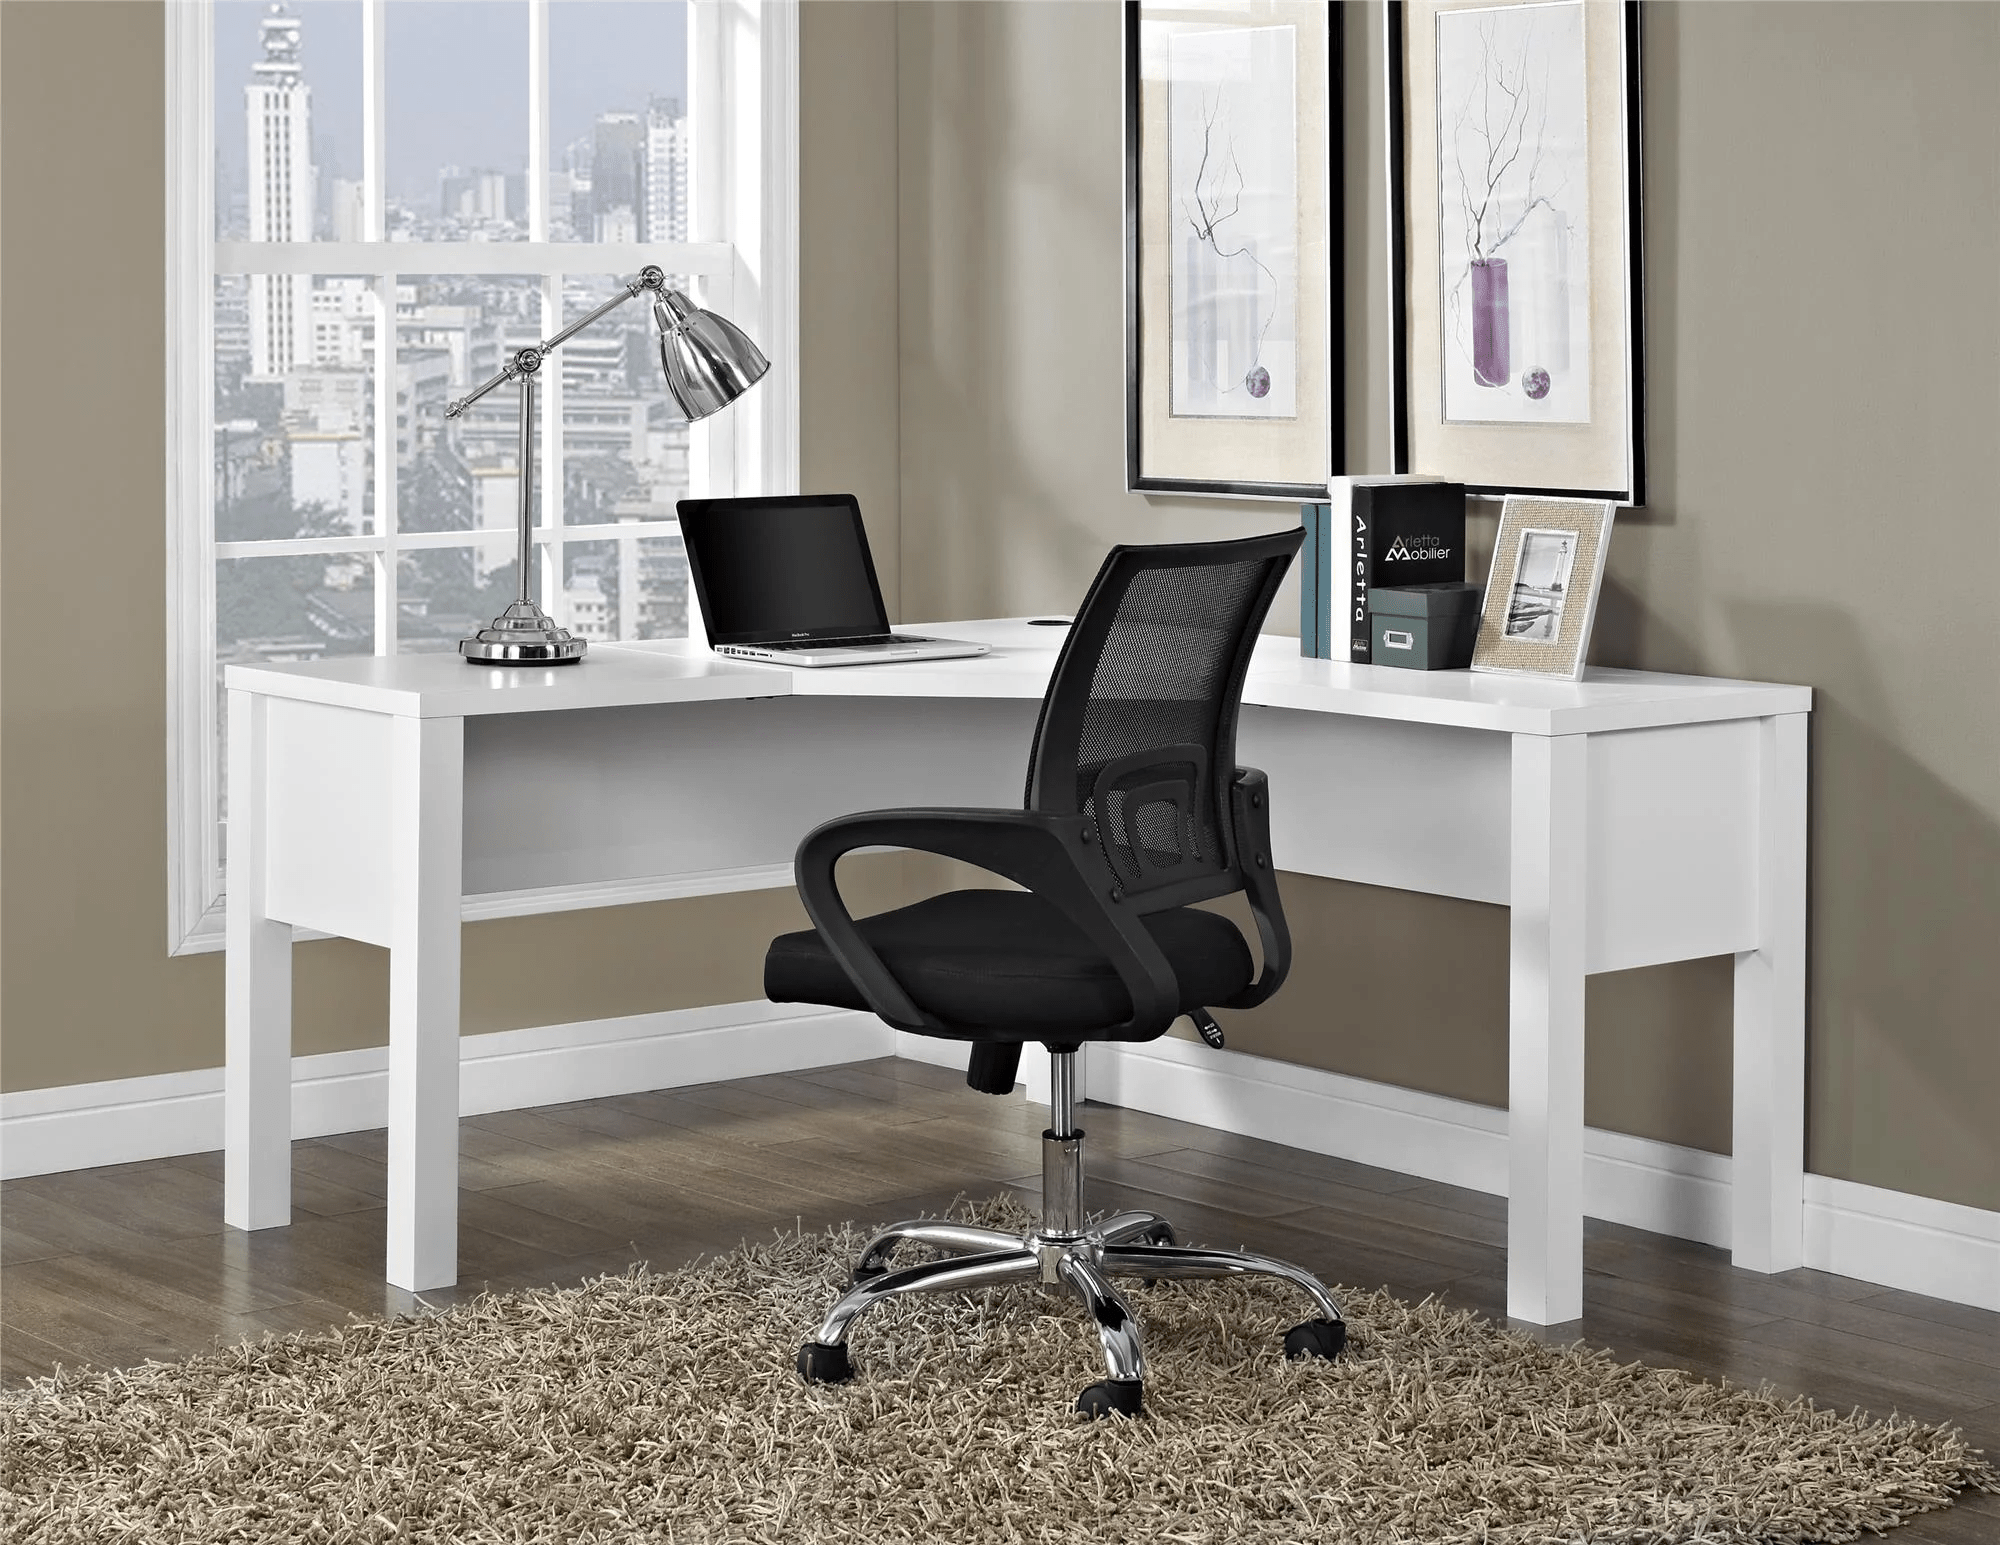 Some Home Office Desk Design Ideas You Would Want to Know